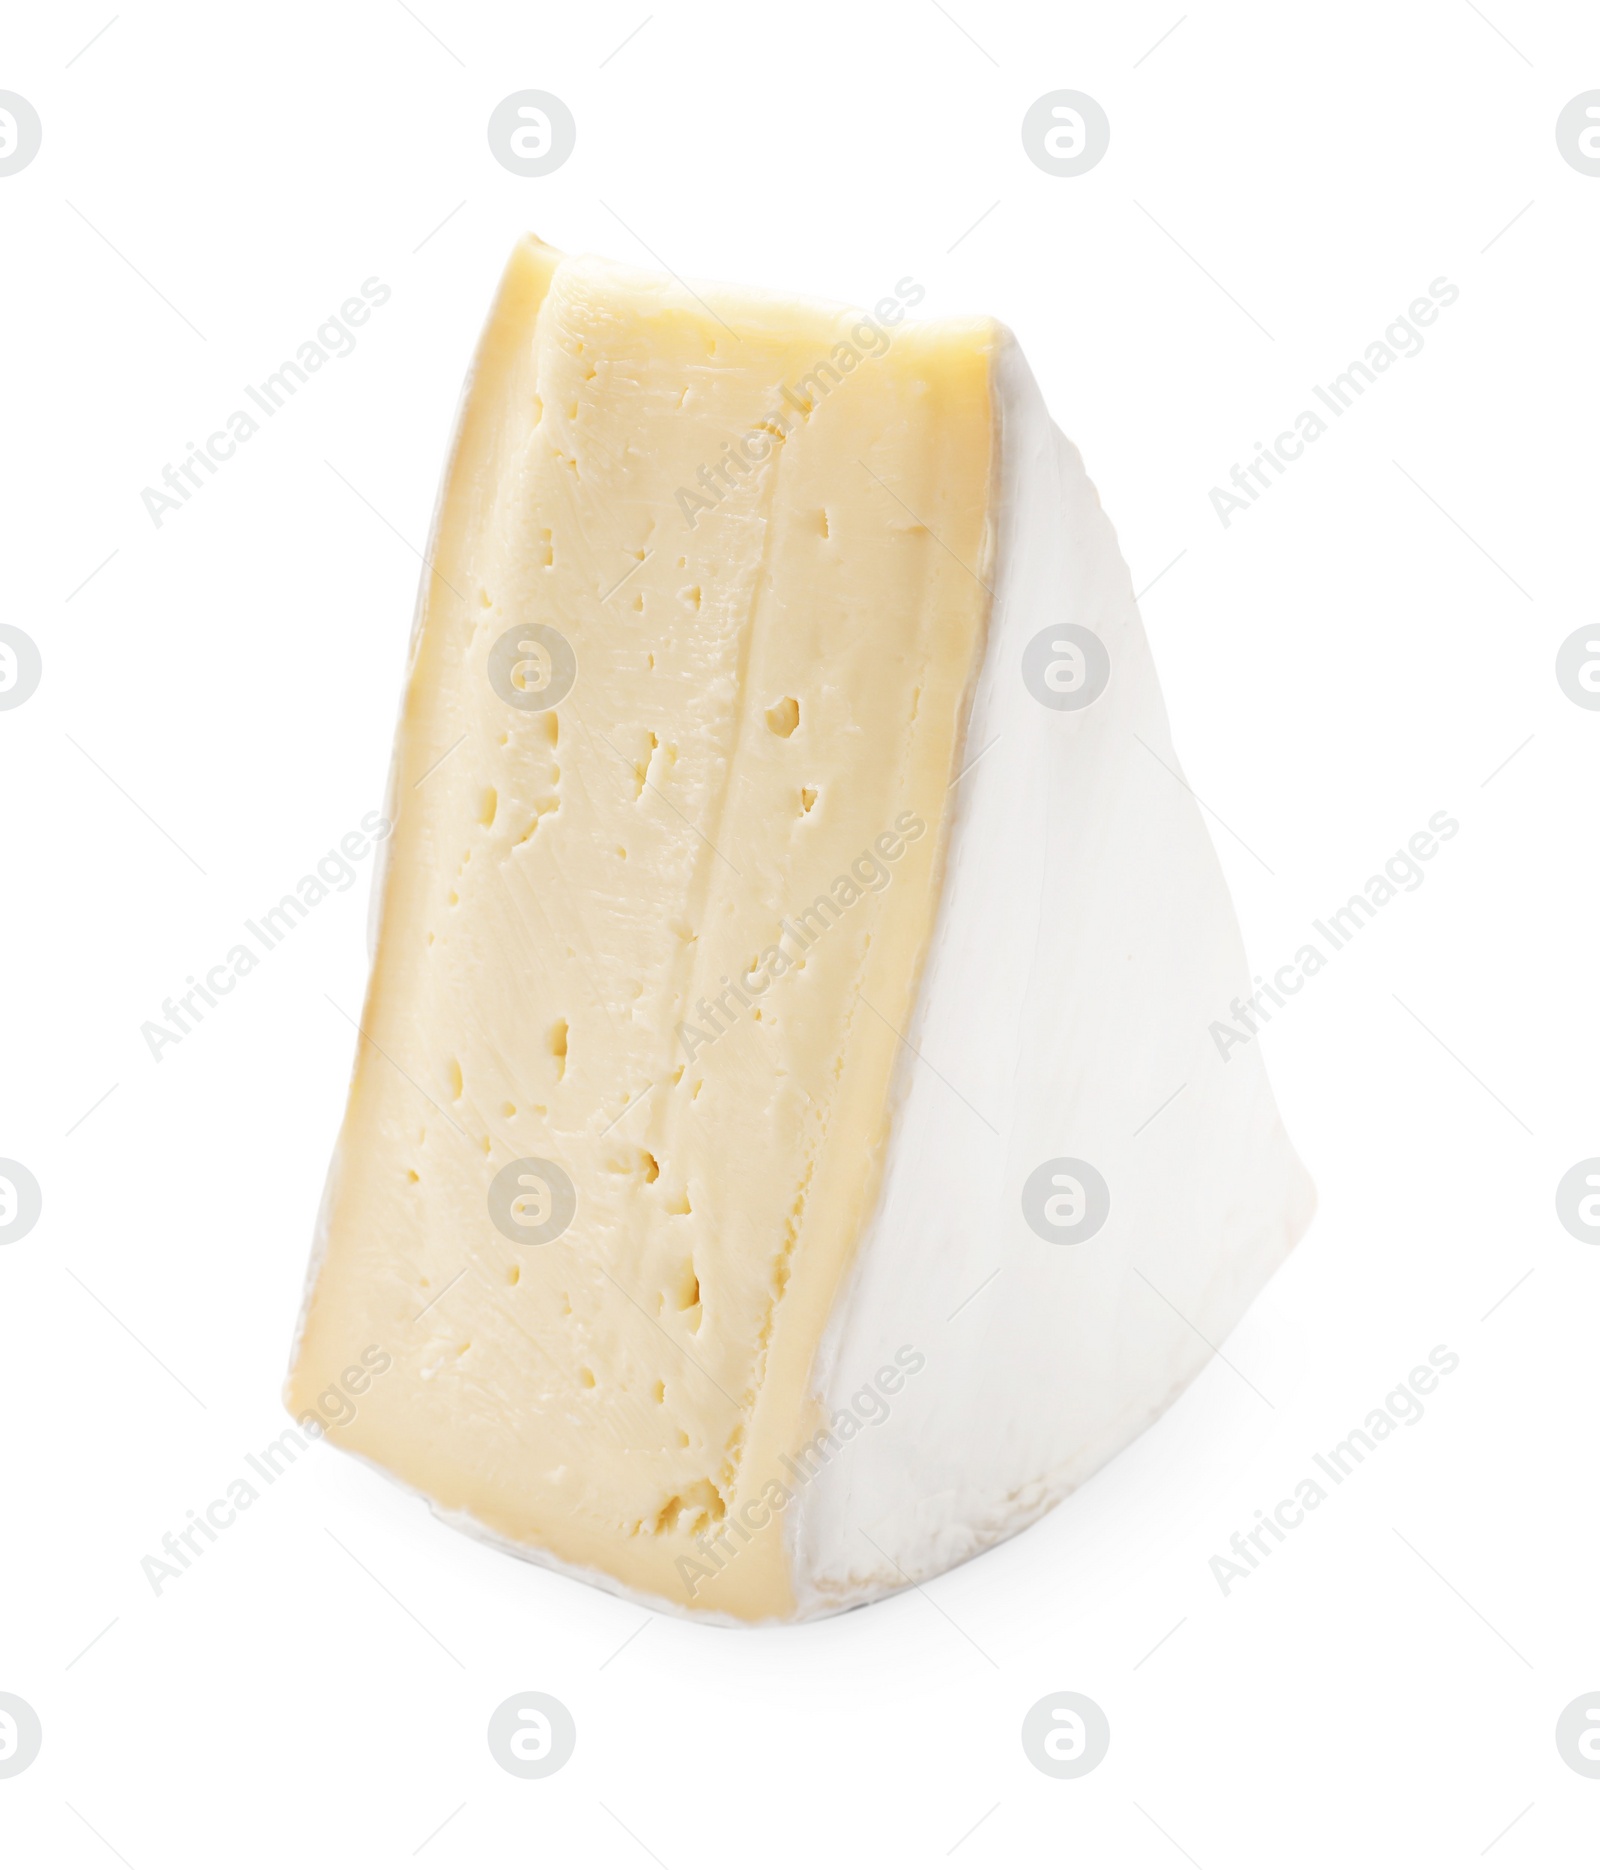 Photo of One piece of tasty camembert cheese isolated on white